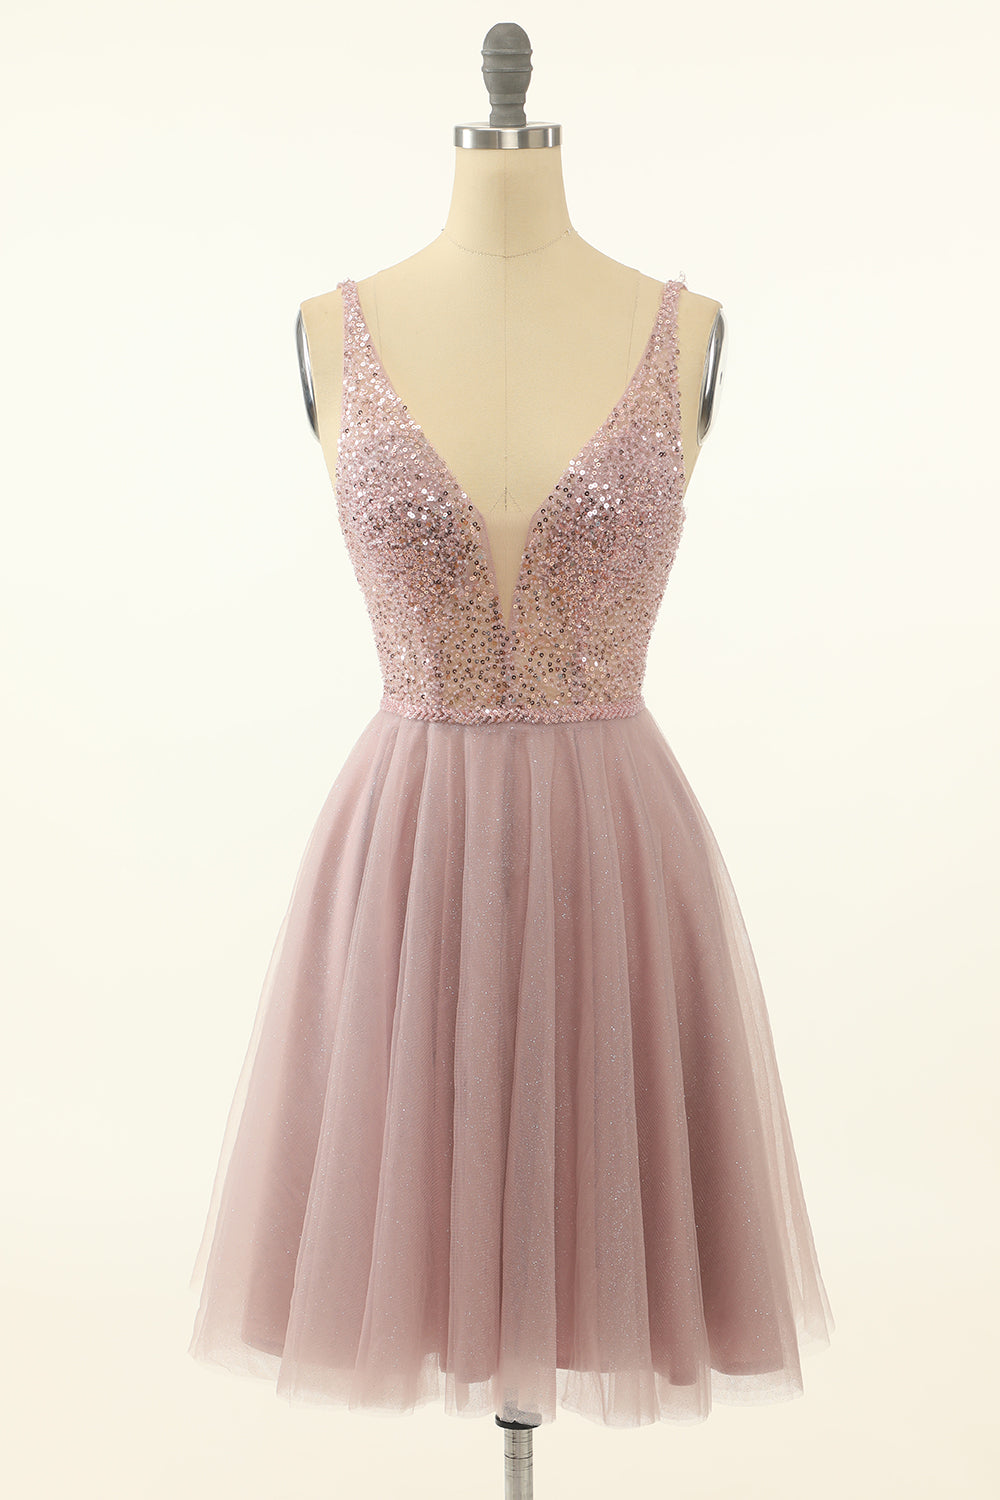 Blush Tulle & Sequins Cute Corset Homecoming Dress outfit, Prom Dresses